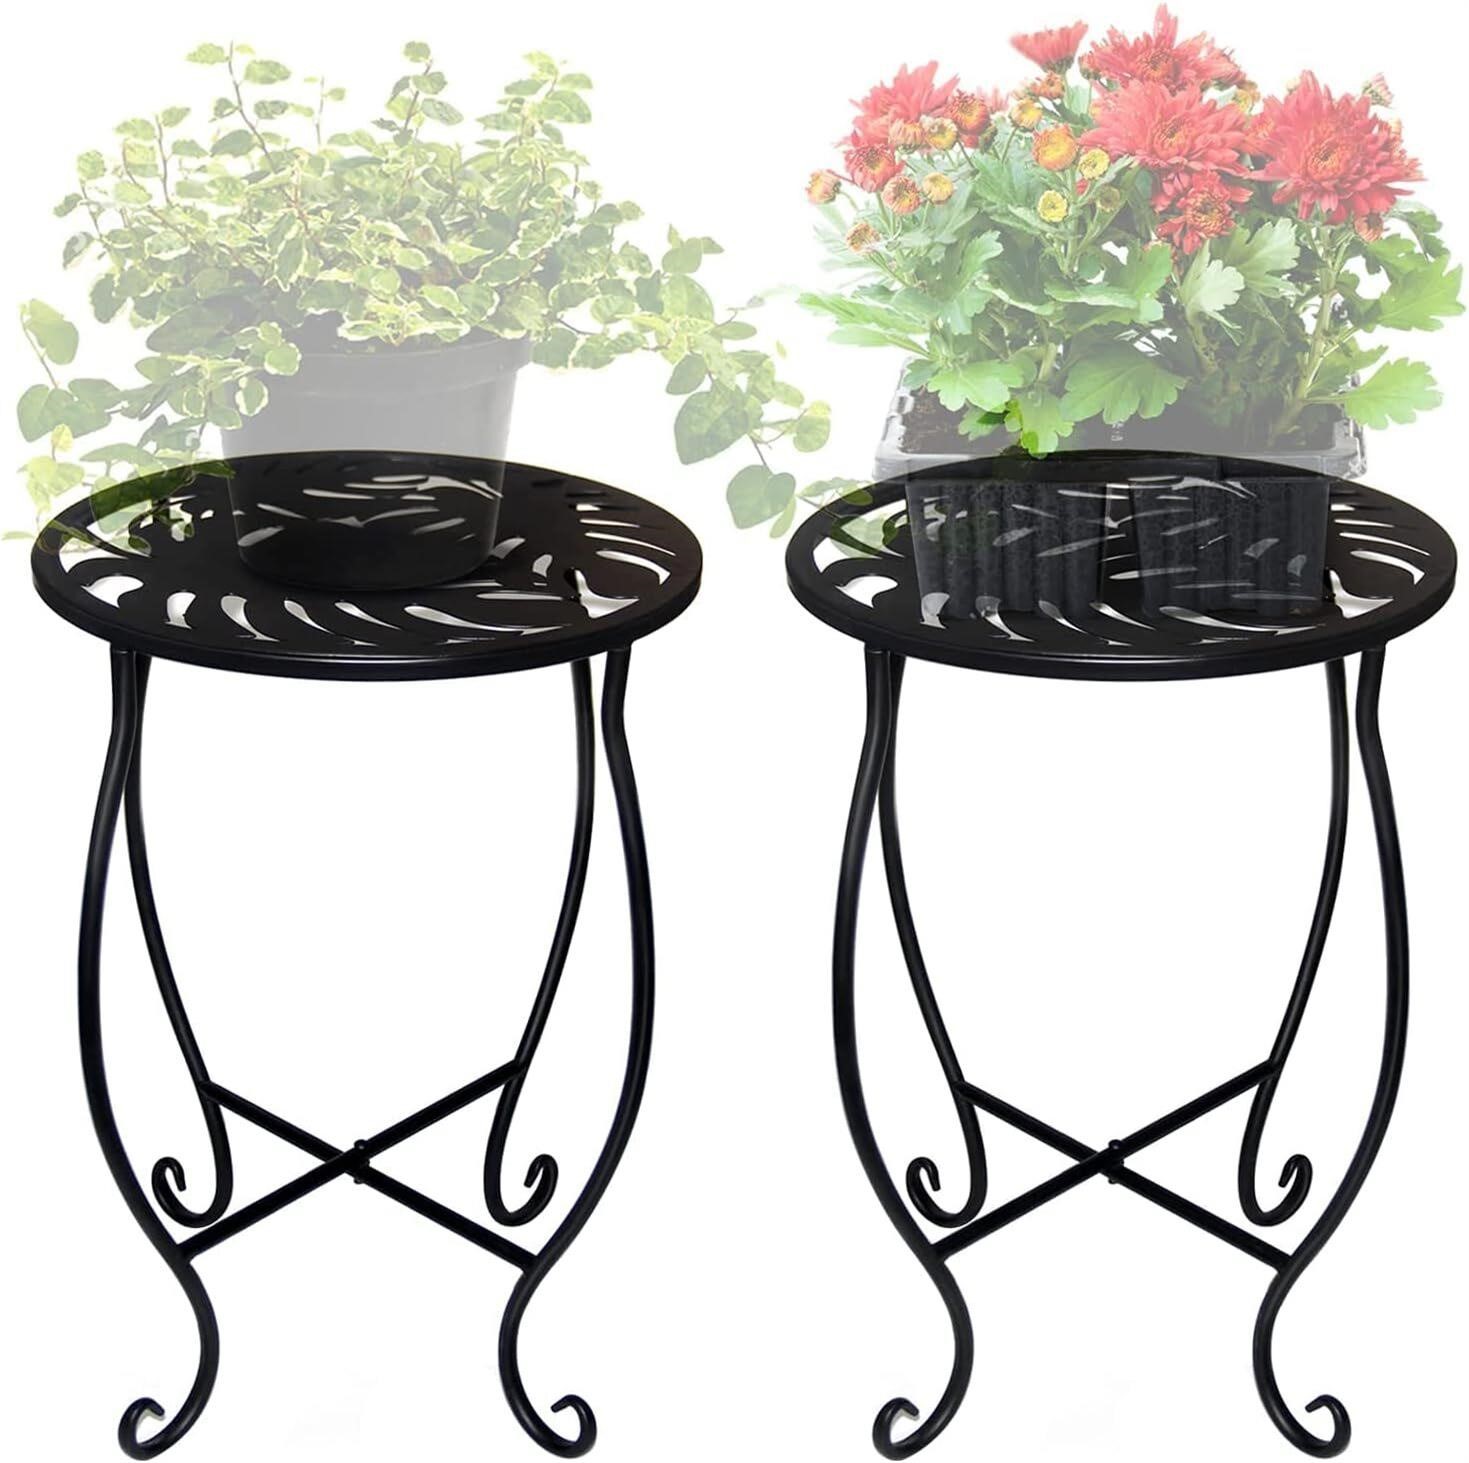 KABB 15' Tall Plant Stand for Flower Pot